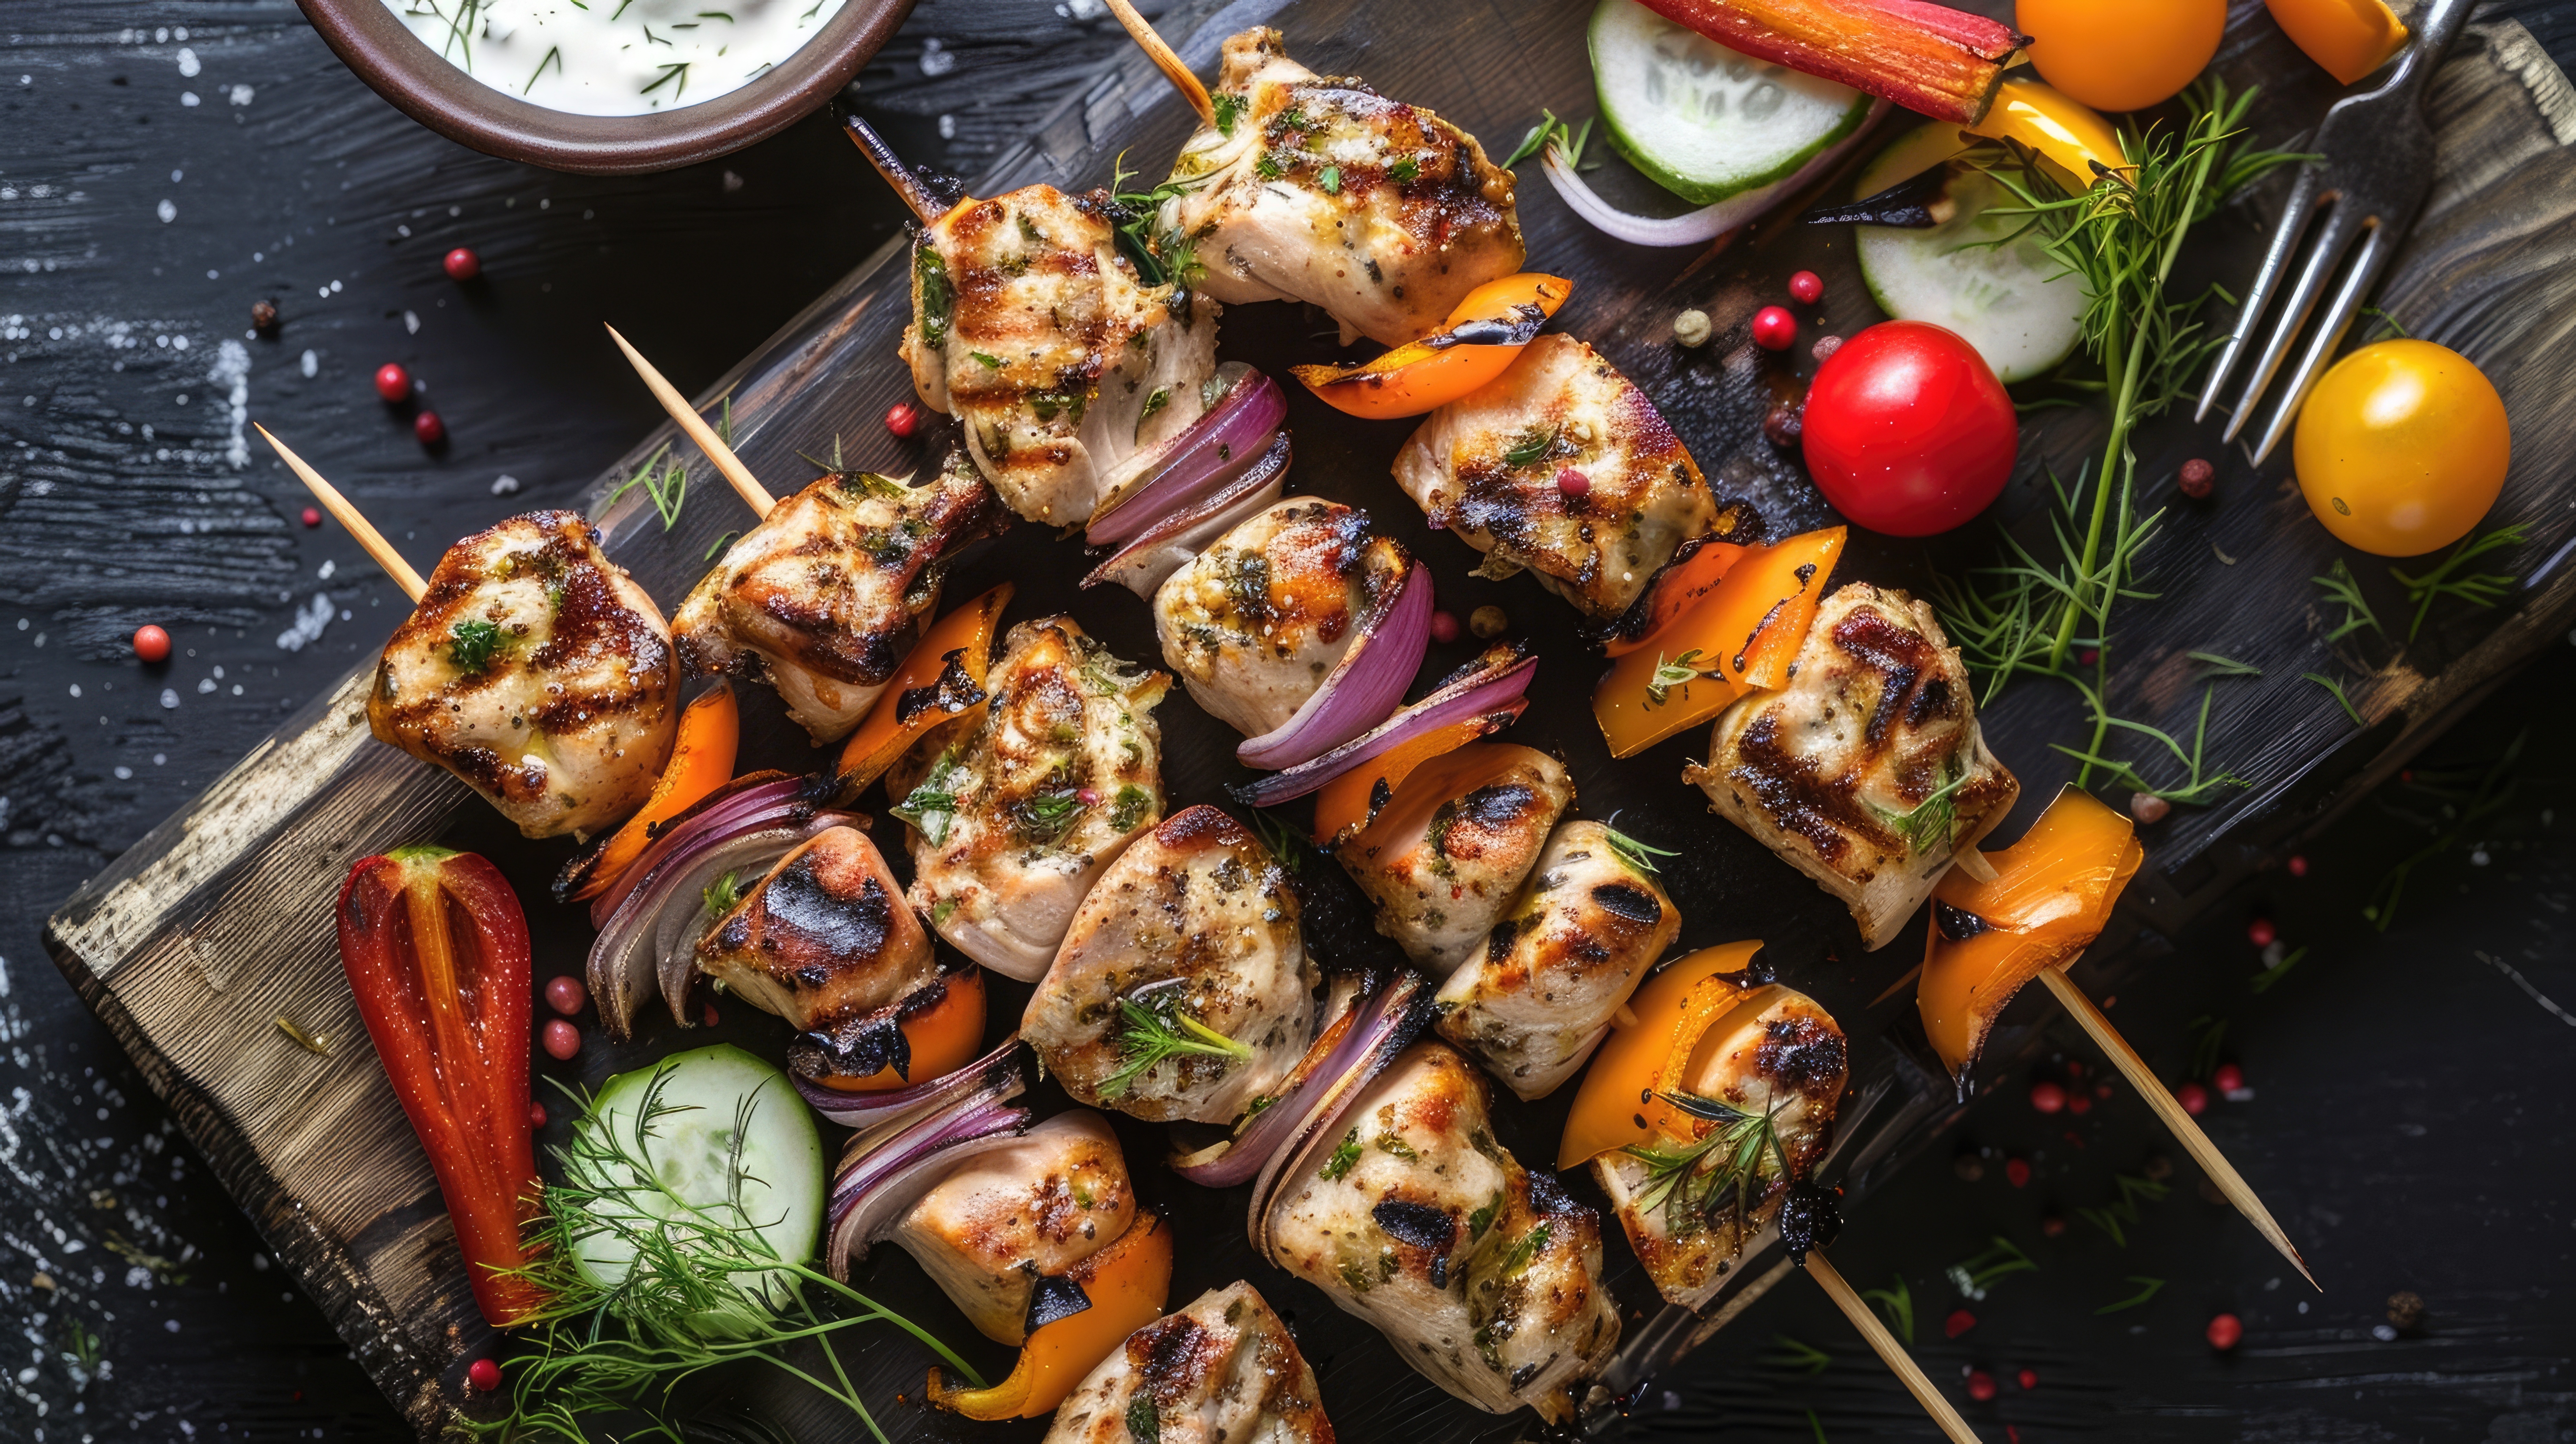 Greek chicken souvlaki with tzatziki sauce and fresh vegetables, grilled kebabs.